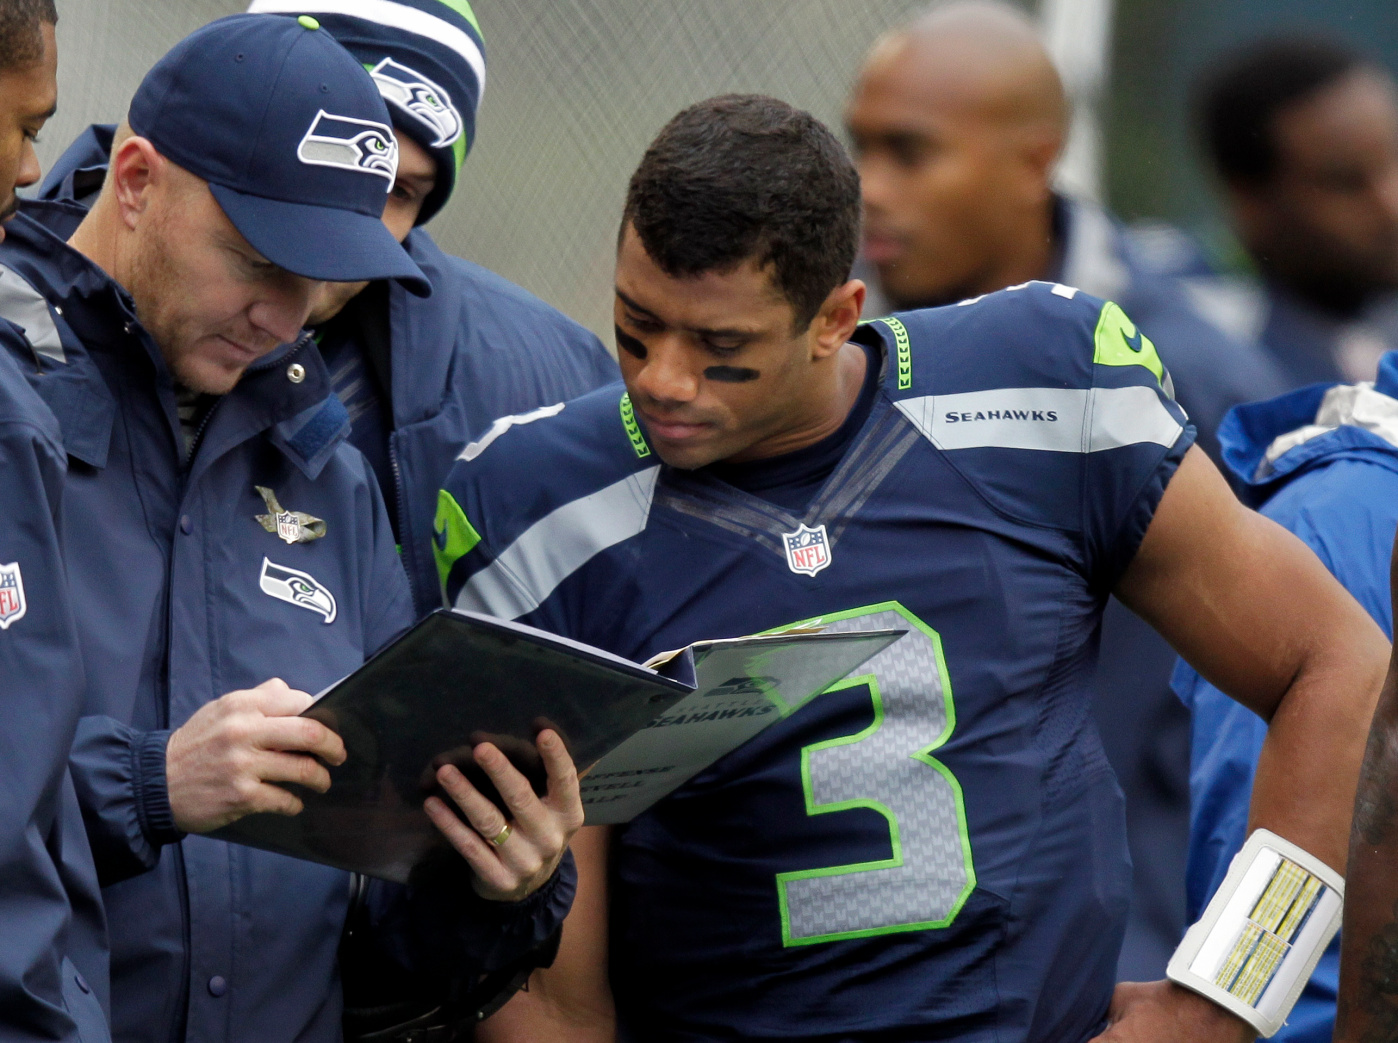 FILE - In this Nov. 11, 2012, file photo, Seattle Seahawks quarterback Russell Wilson, right, looks at a playbook with offensive coordinator Darrell Bevell, left, on the sidelines during the first half of an NFL football game against the New York Jets in Seattle. Even though Wilson will play his first playoff game Sunday at Washington, Bevell expects more of the same poise he's seen out of his QB all season. (AP Photo/Stephen Brashear, File)